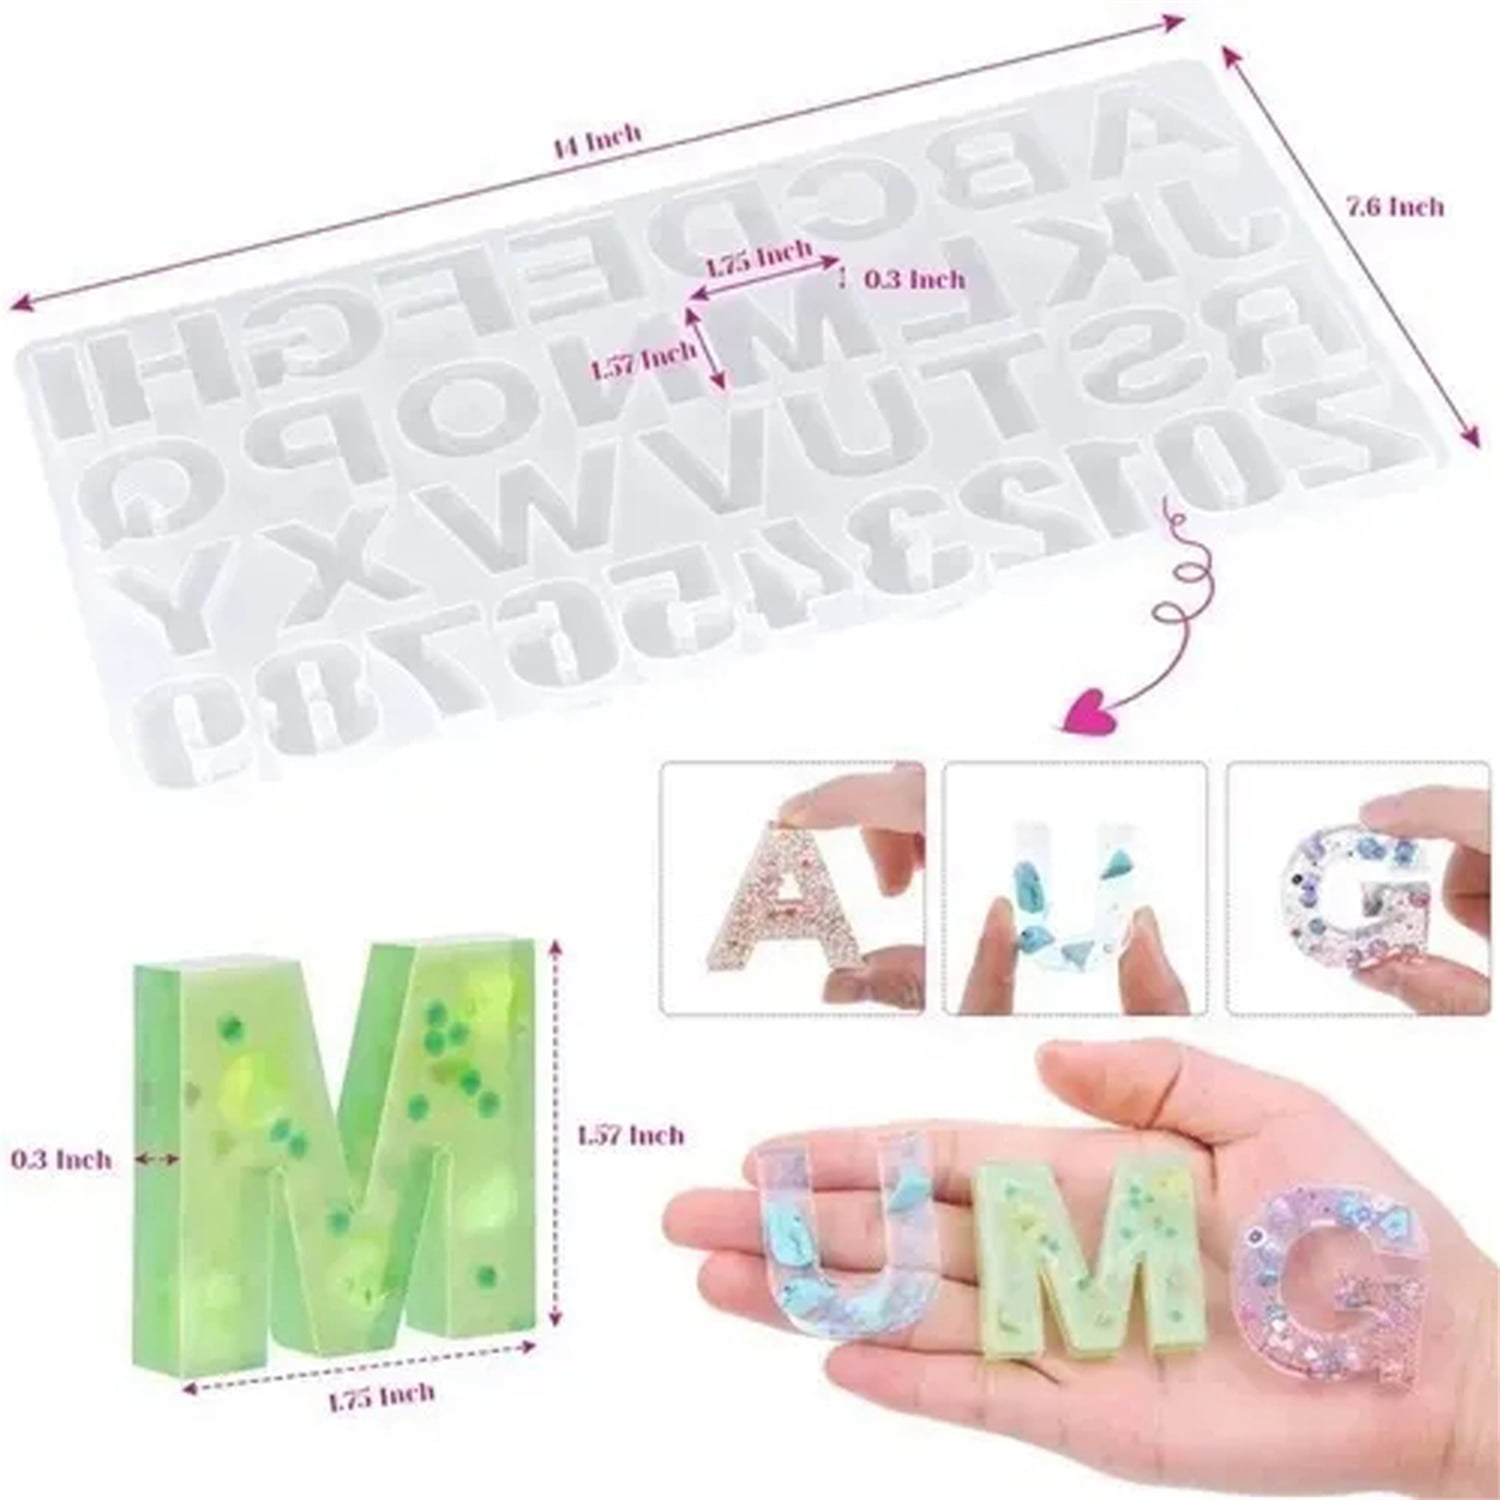 Alphabet Keychain Resin Molds Silicone Kit 208Pcs for Epoxy Resin Casting  Beginners, Including Backward Resin Letter Keychain Mold, Resin Drill